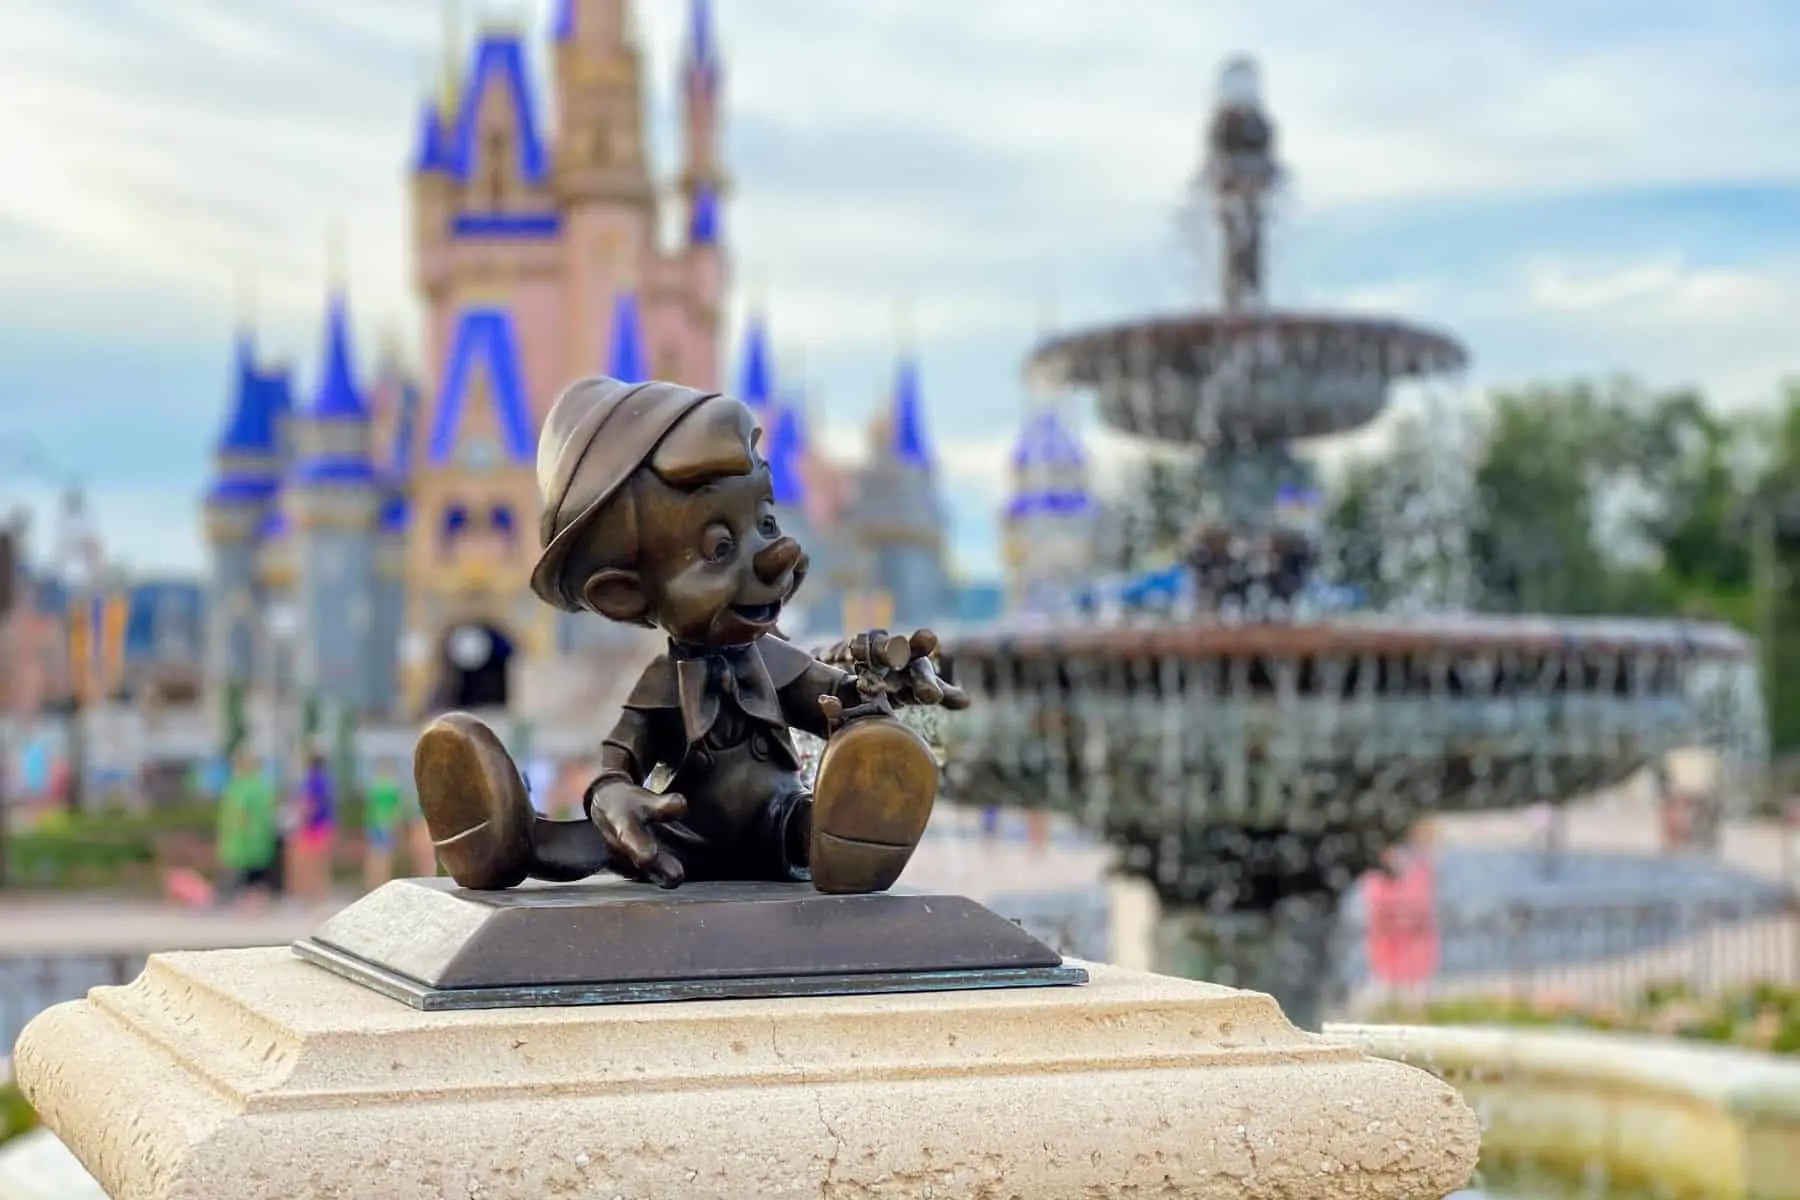 15 things to remember if traveling to Disney World in 2021